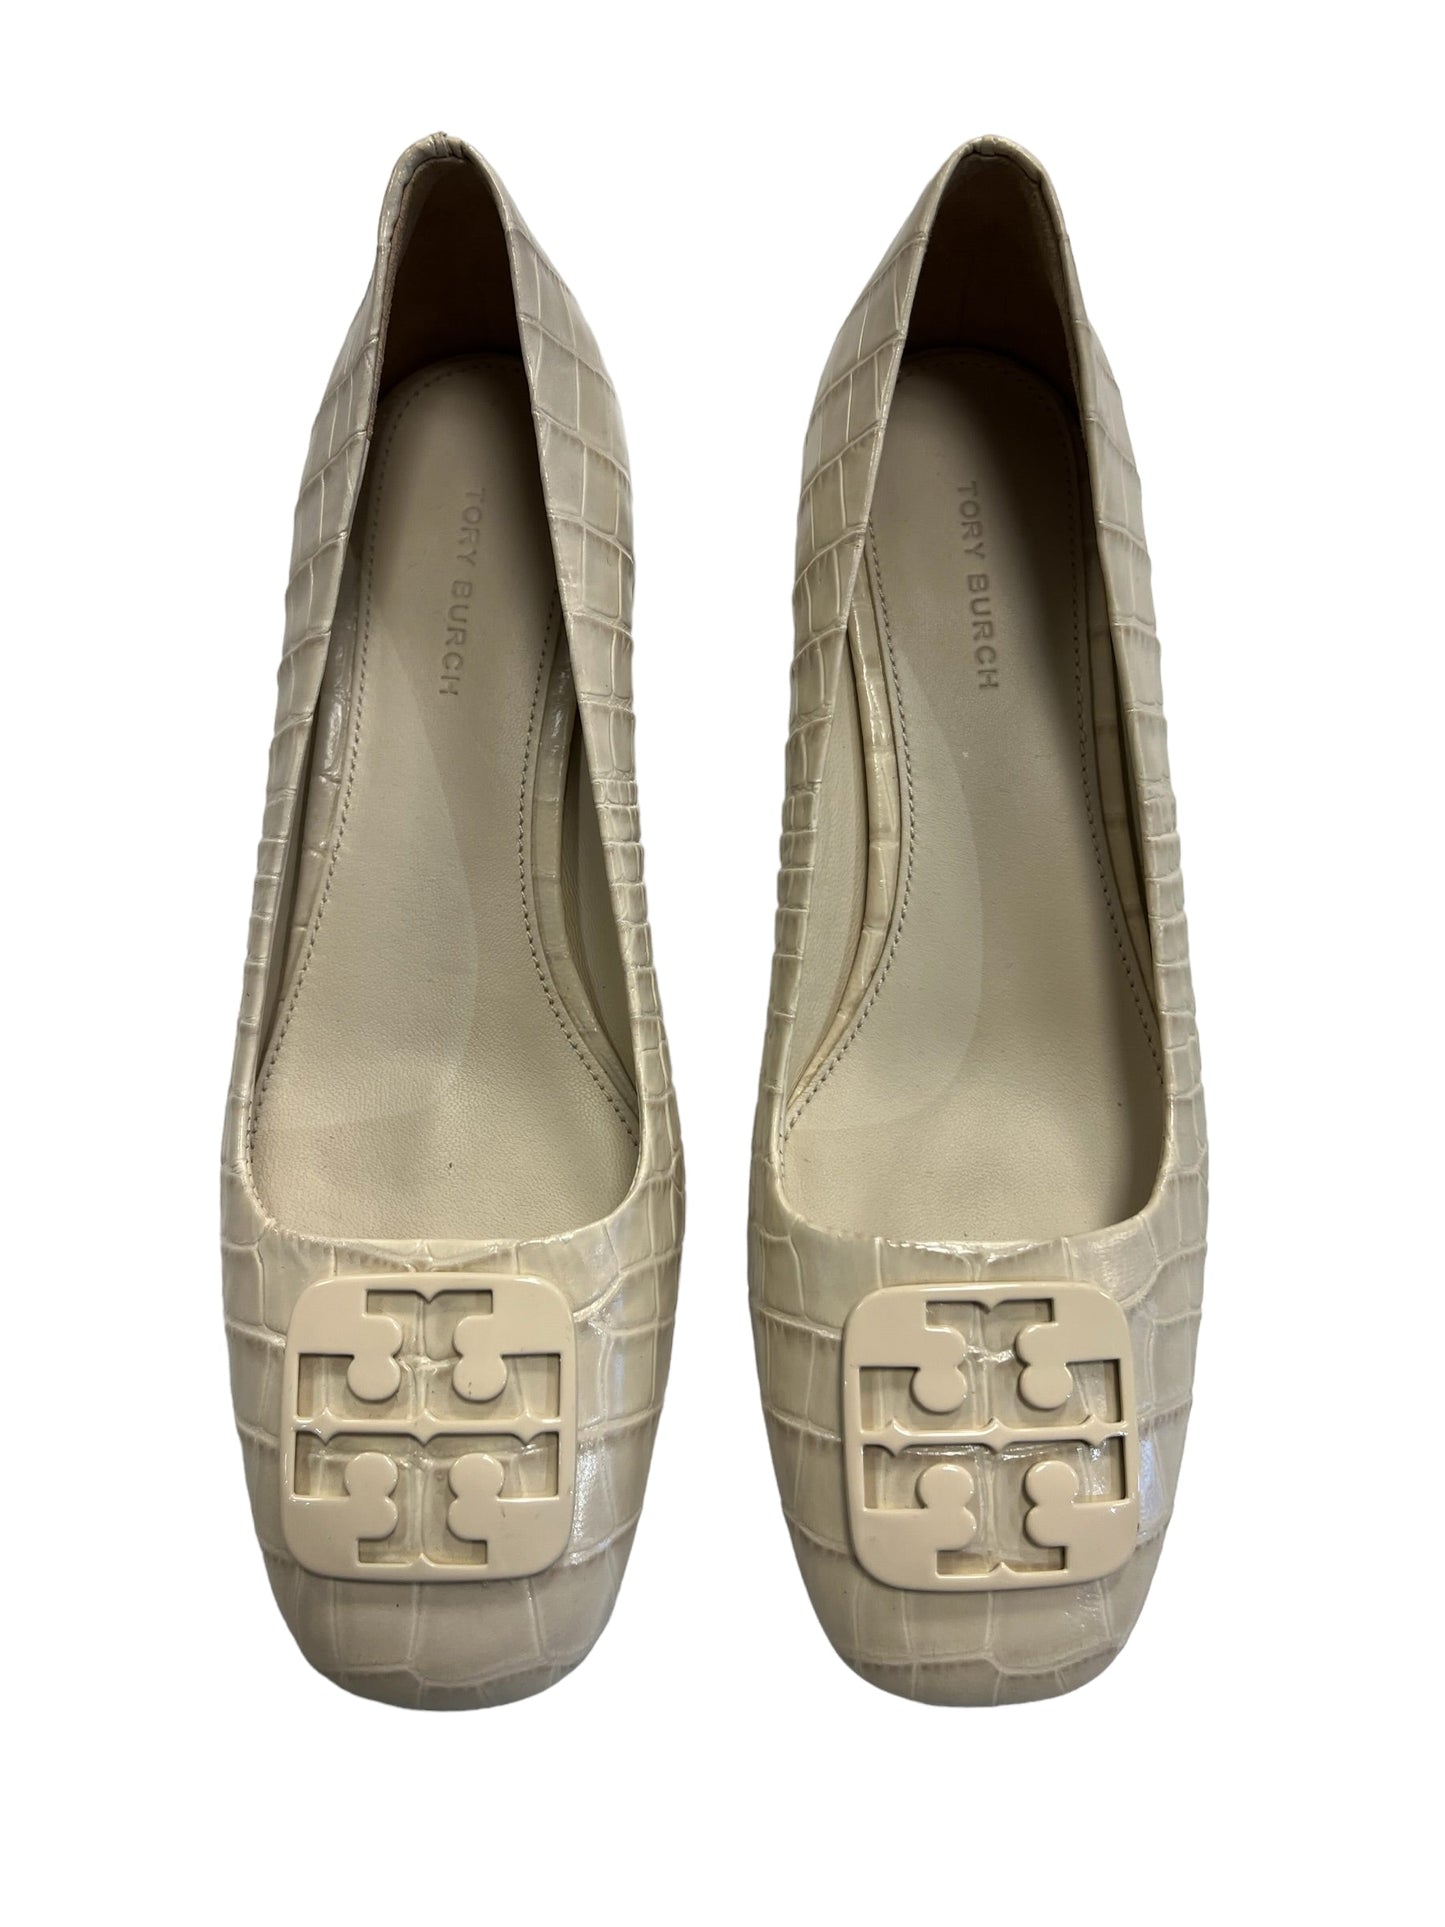 Shoes Designer By Tory Burch  Size: 6